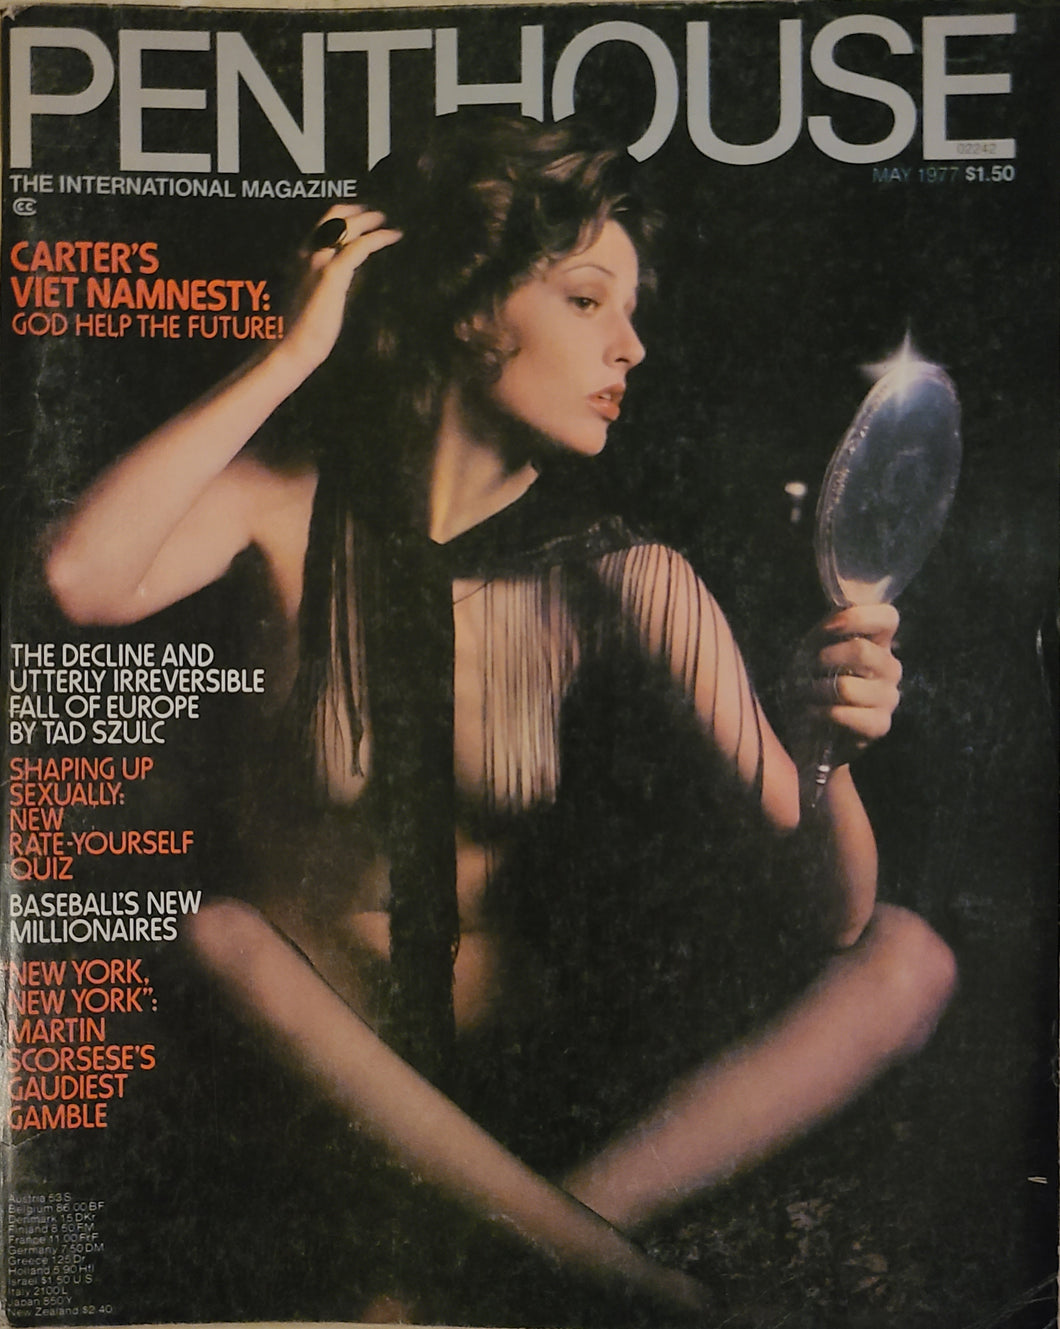 Penthouse - May 1977